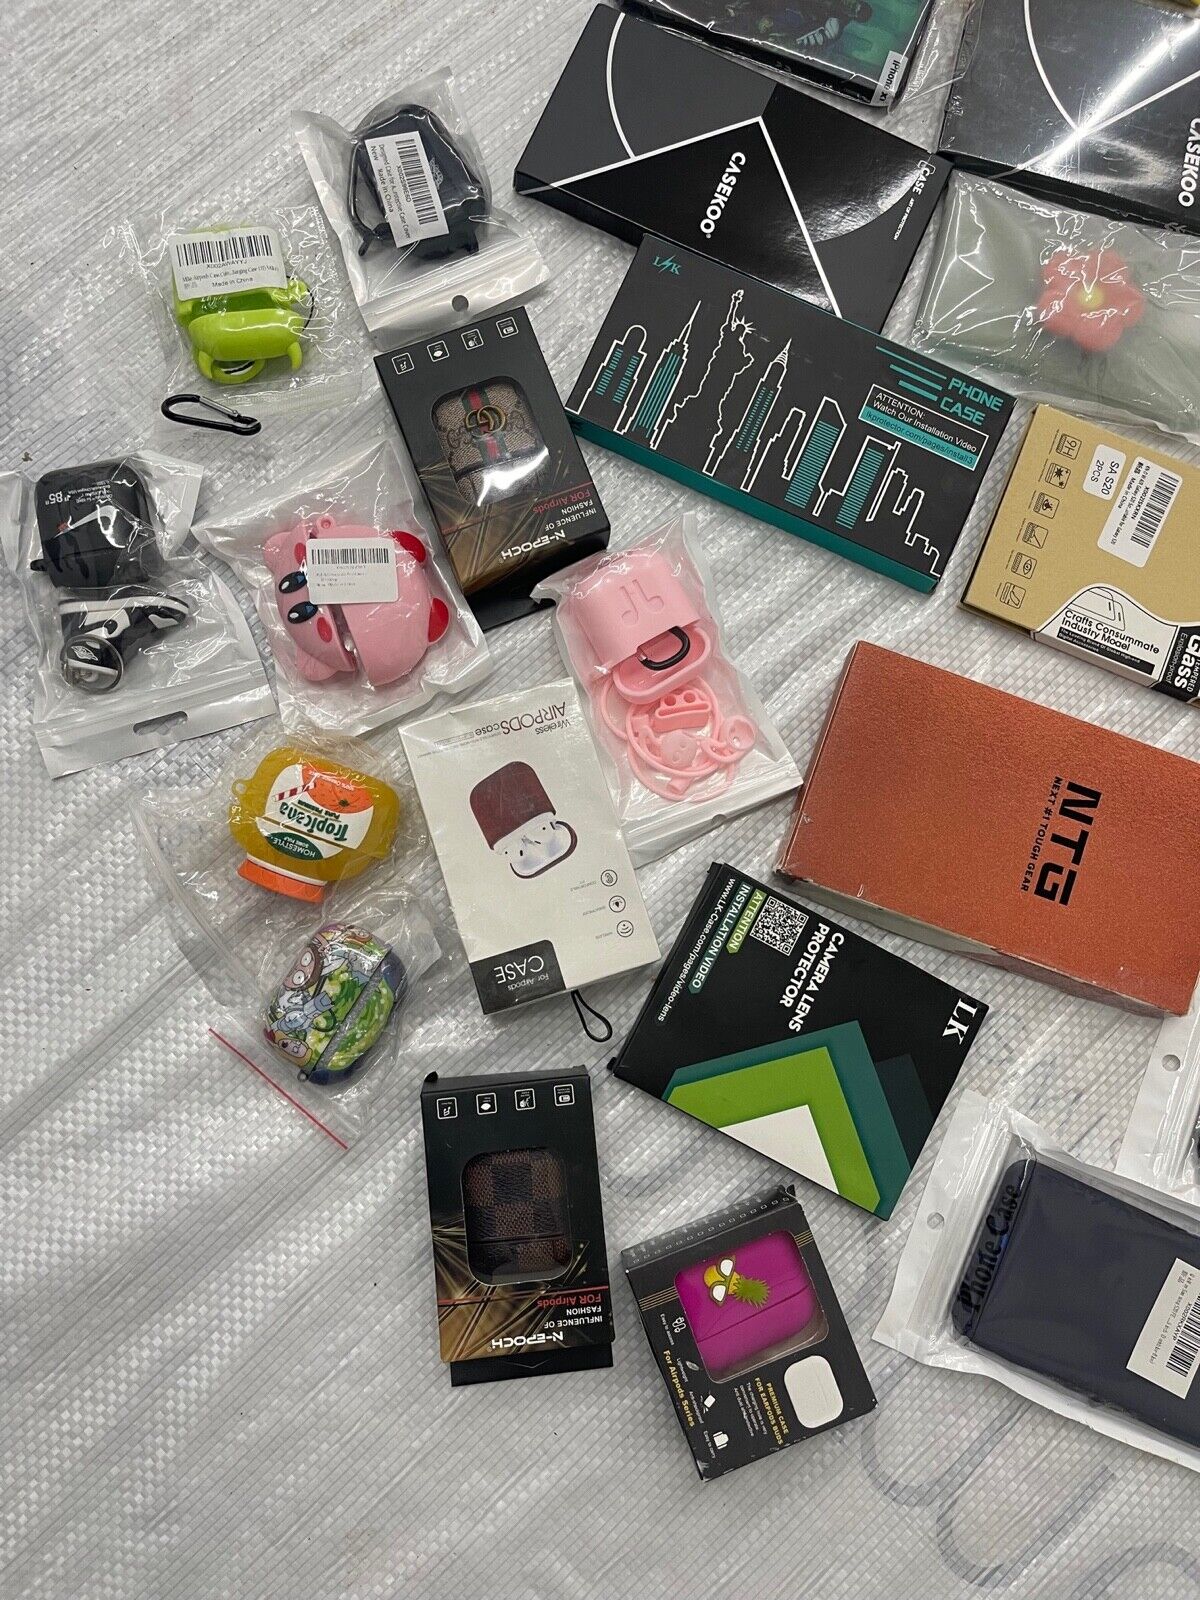 NEW! Phone Accessories MYSTERY Box